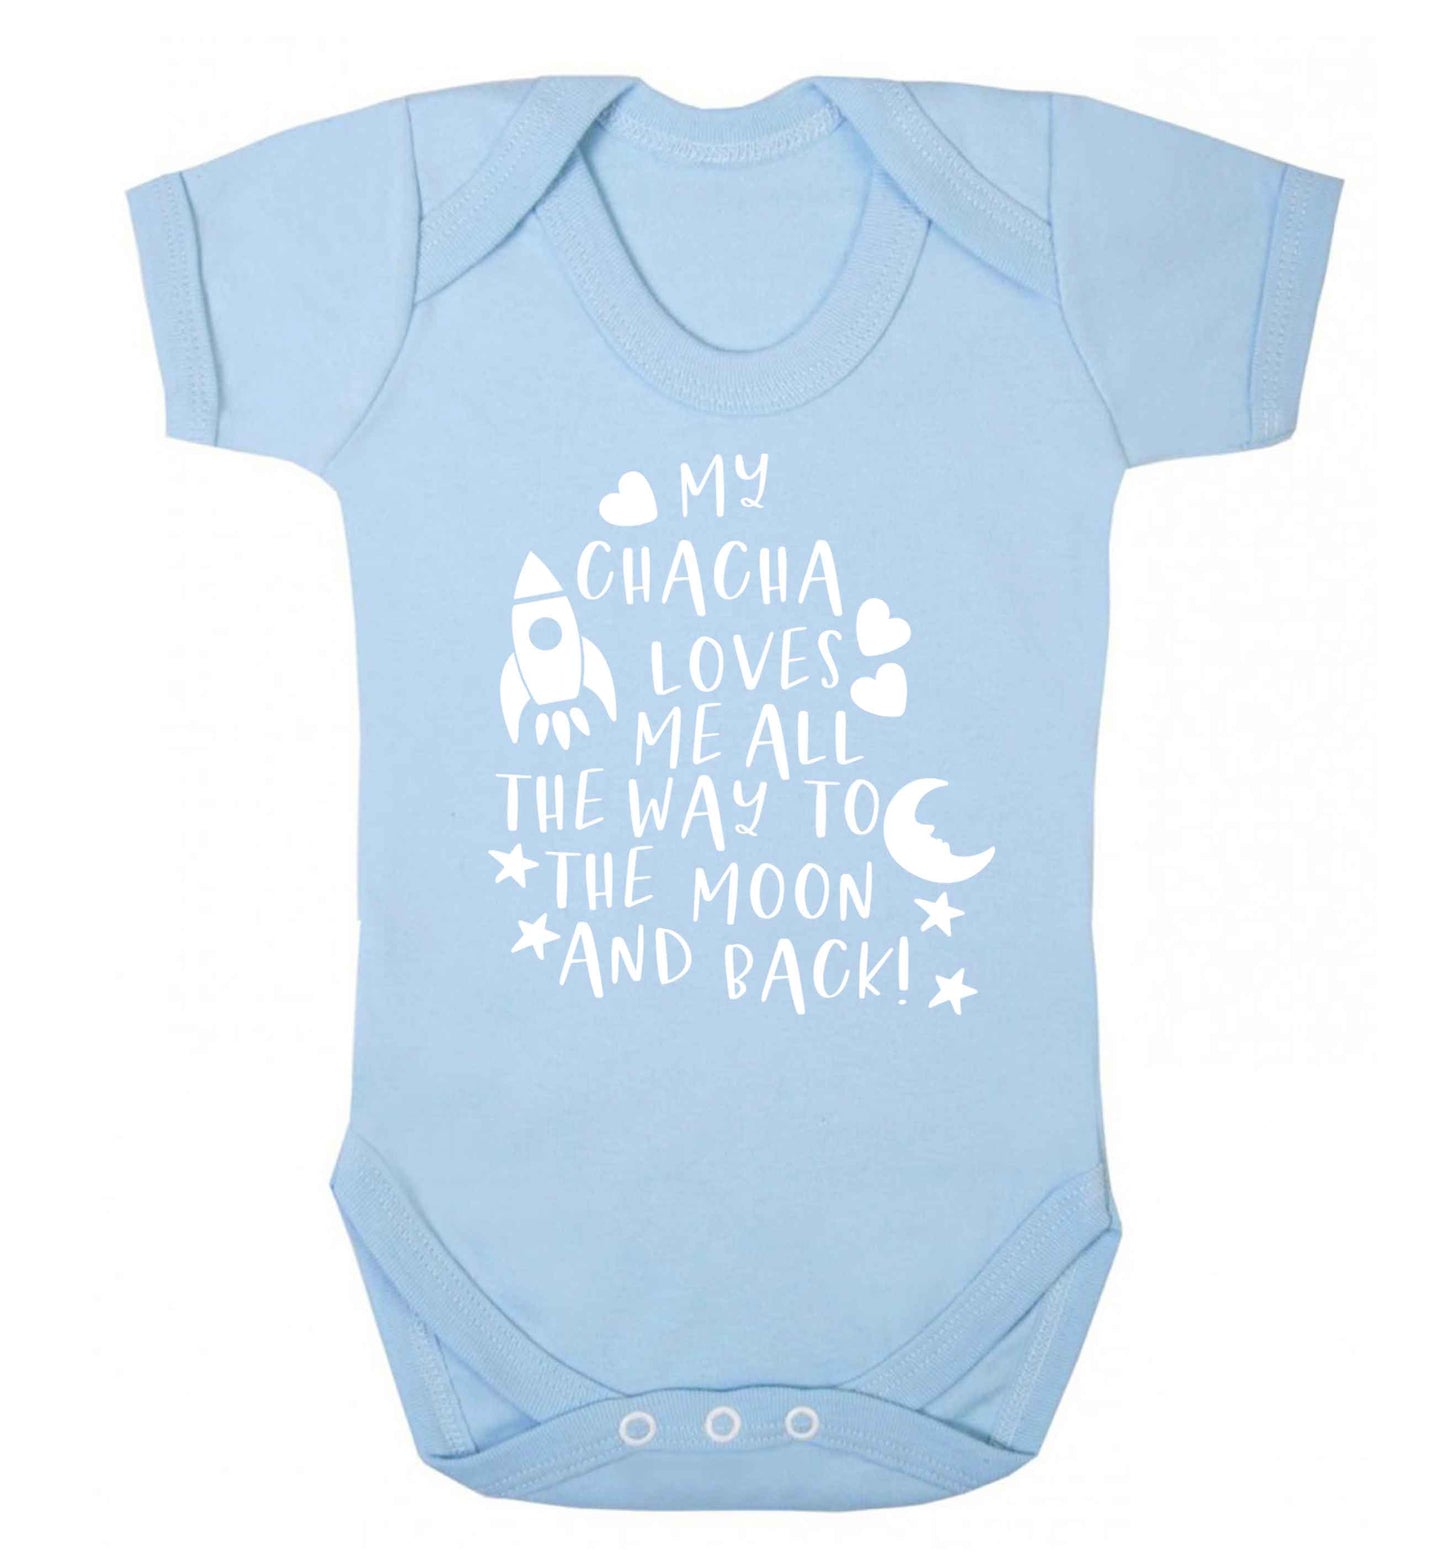 My chacha loves me all the way to the moon and back Baby Vest pale blue 18-24 months